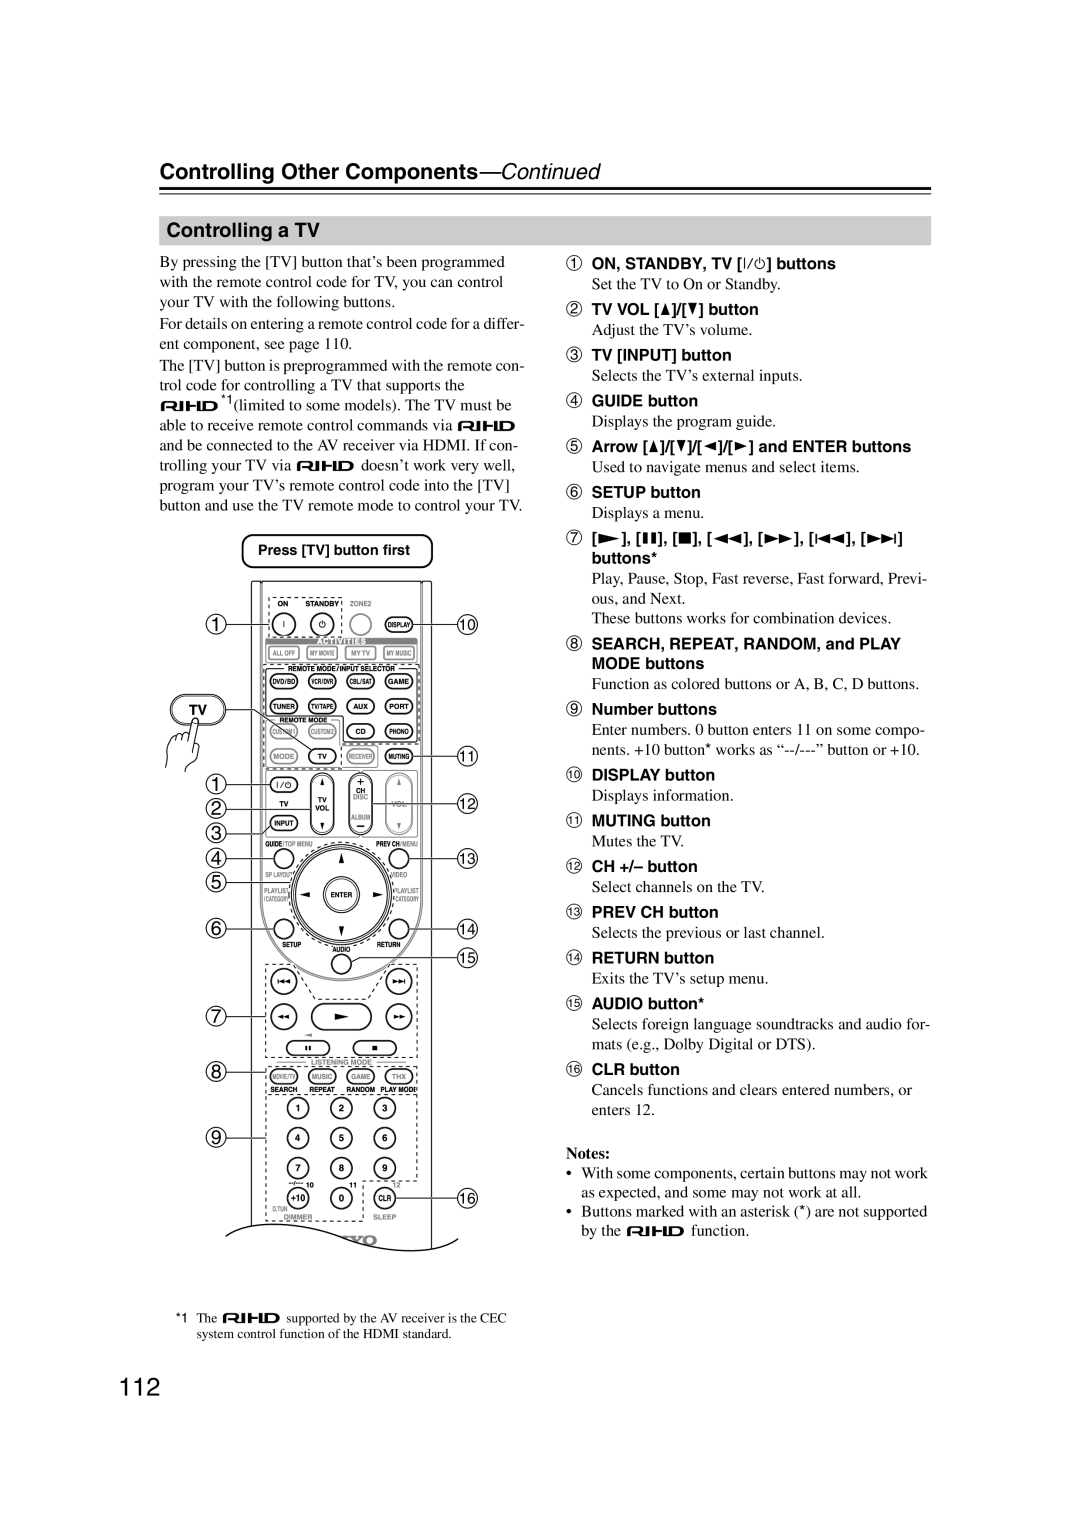 Onkyo TX-SR707 instruction manual fn o g, Controlling Other Components—Continued 